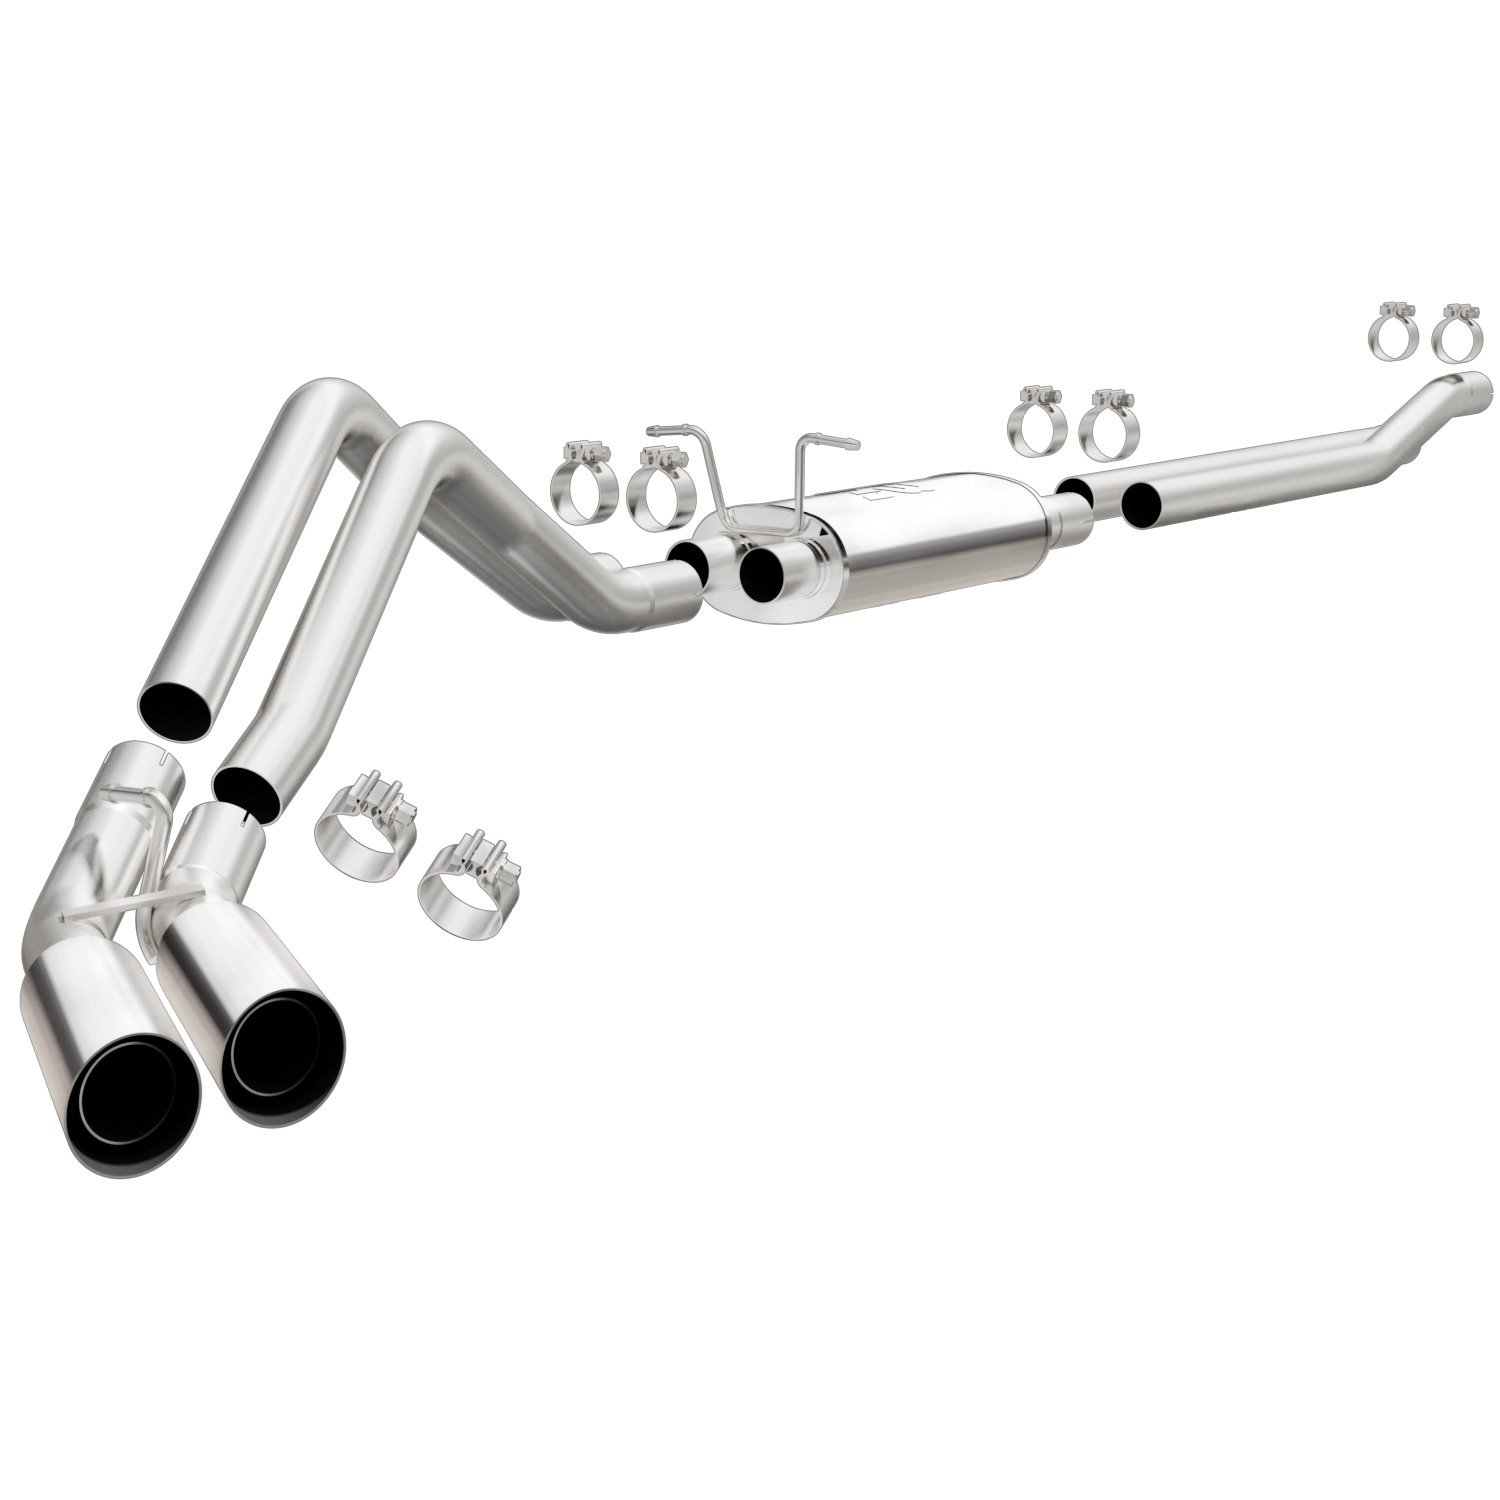 MF Series Cat-Back Exhaust System 2002-03 F-150 Harley-Davidson Supercharged 5.4L